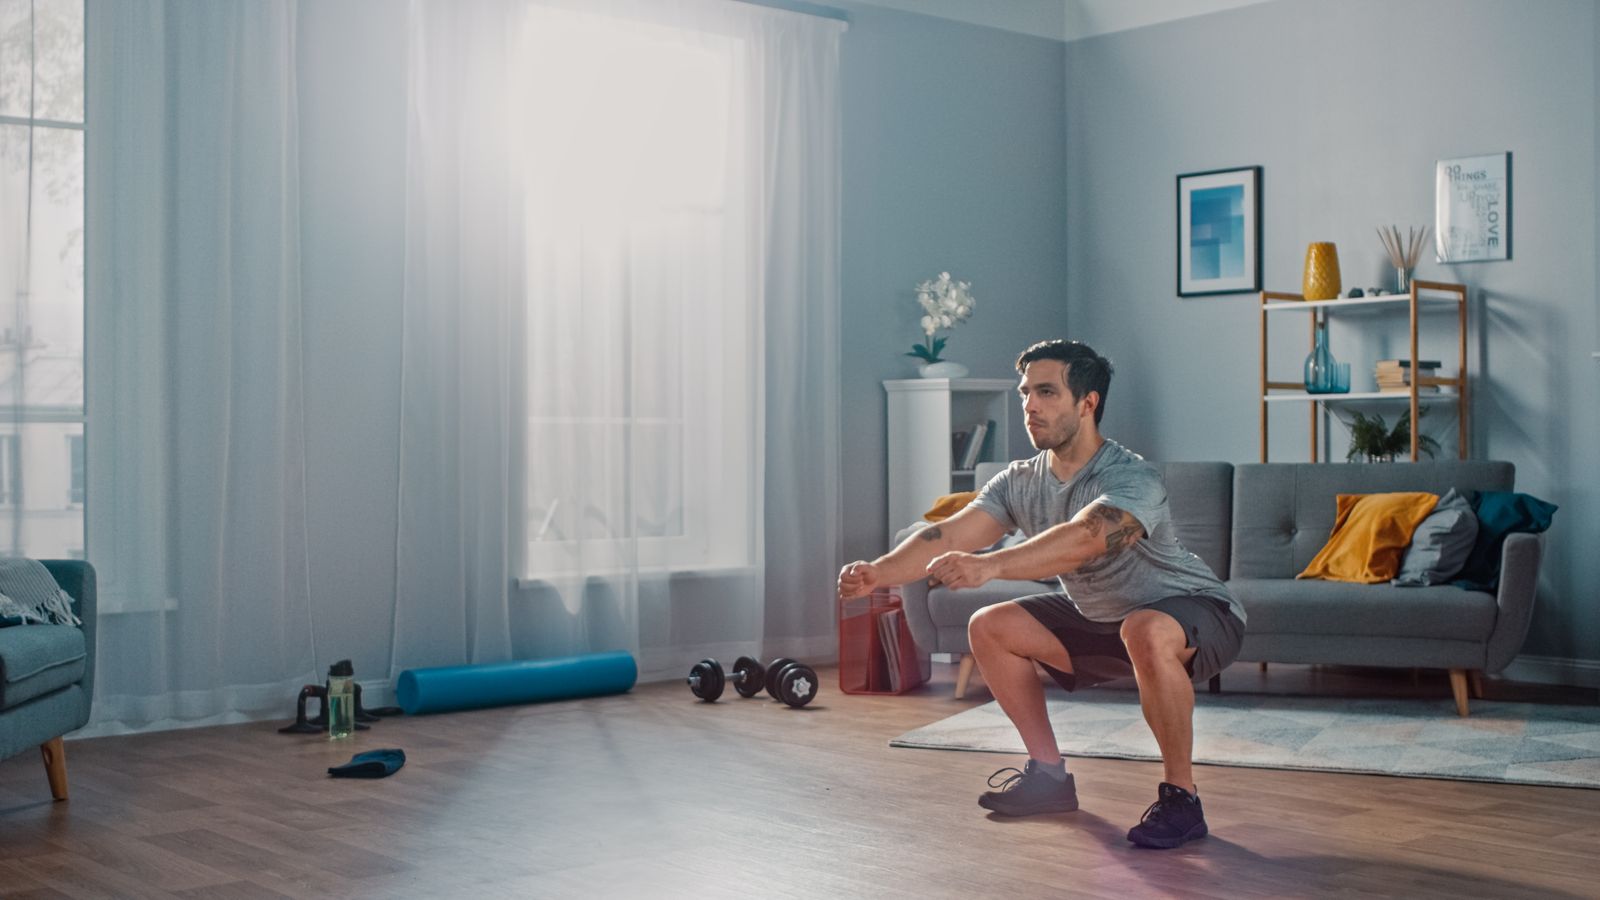 Man working out in living room